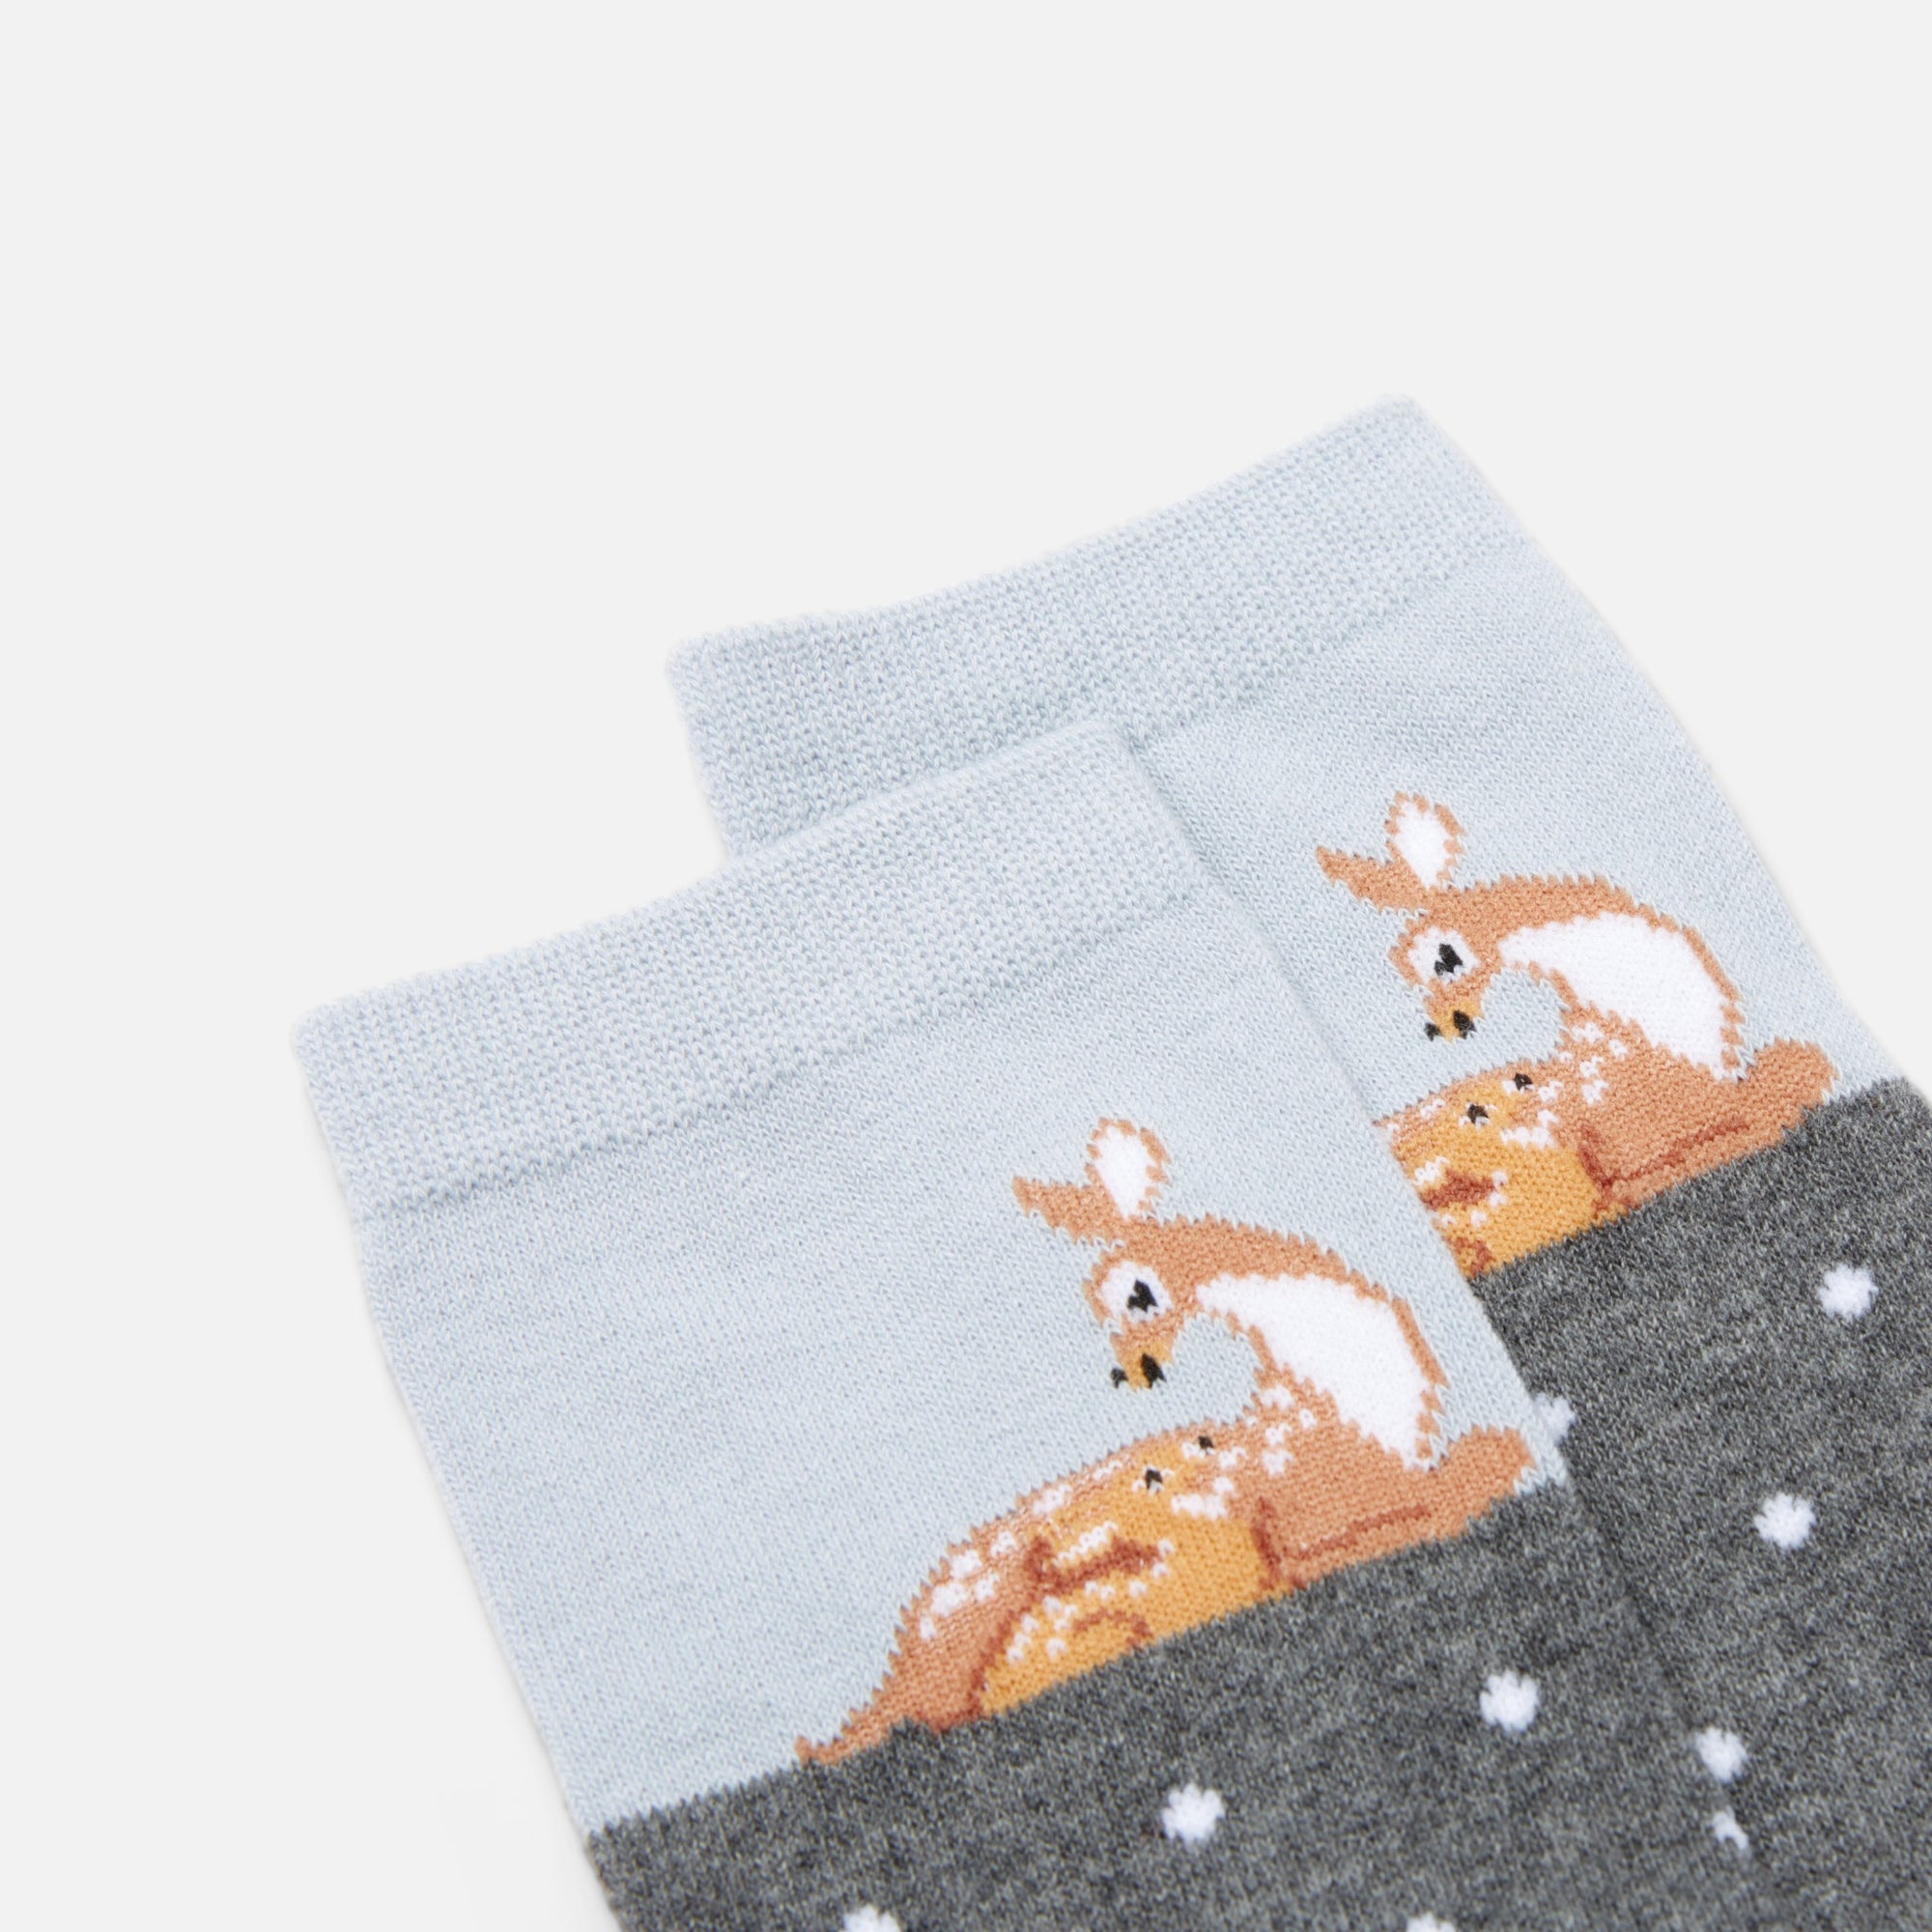 Dark grey socks with a deer and its baby